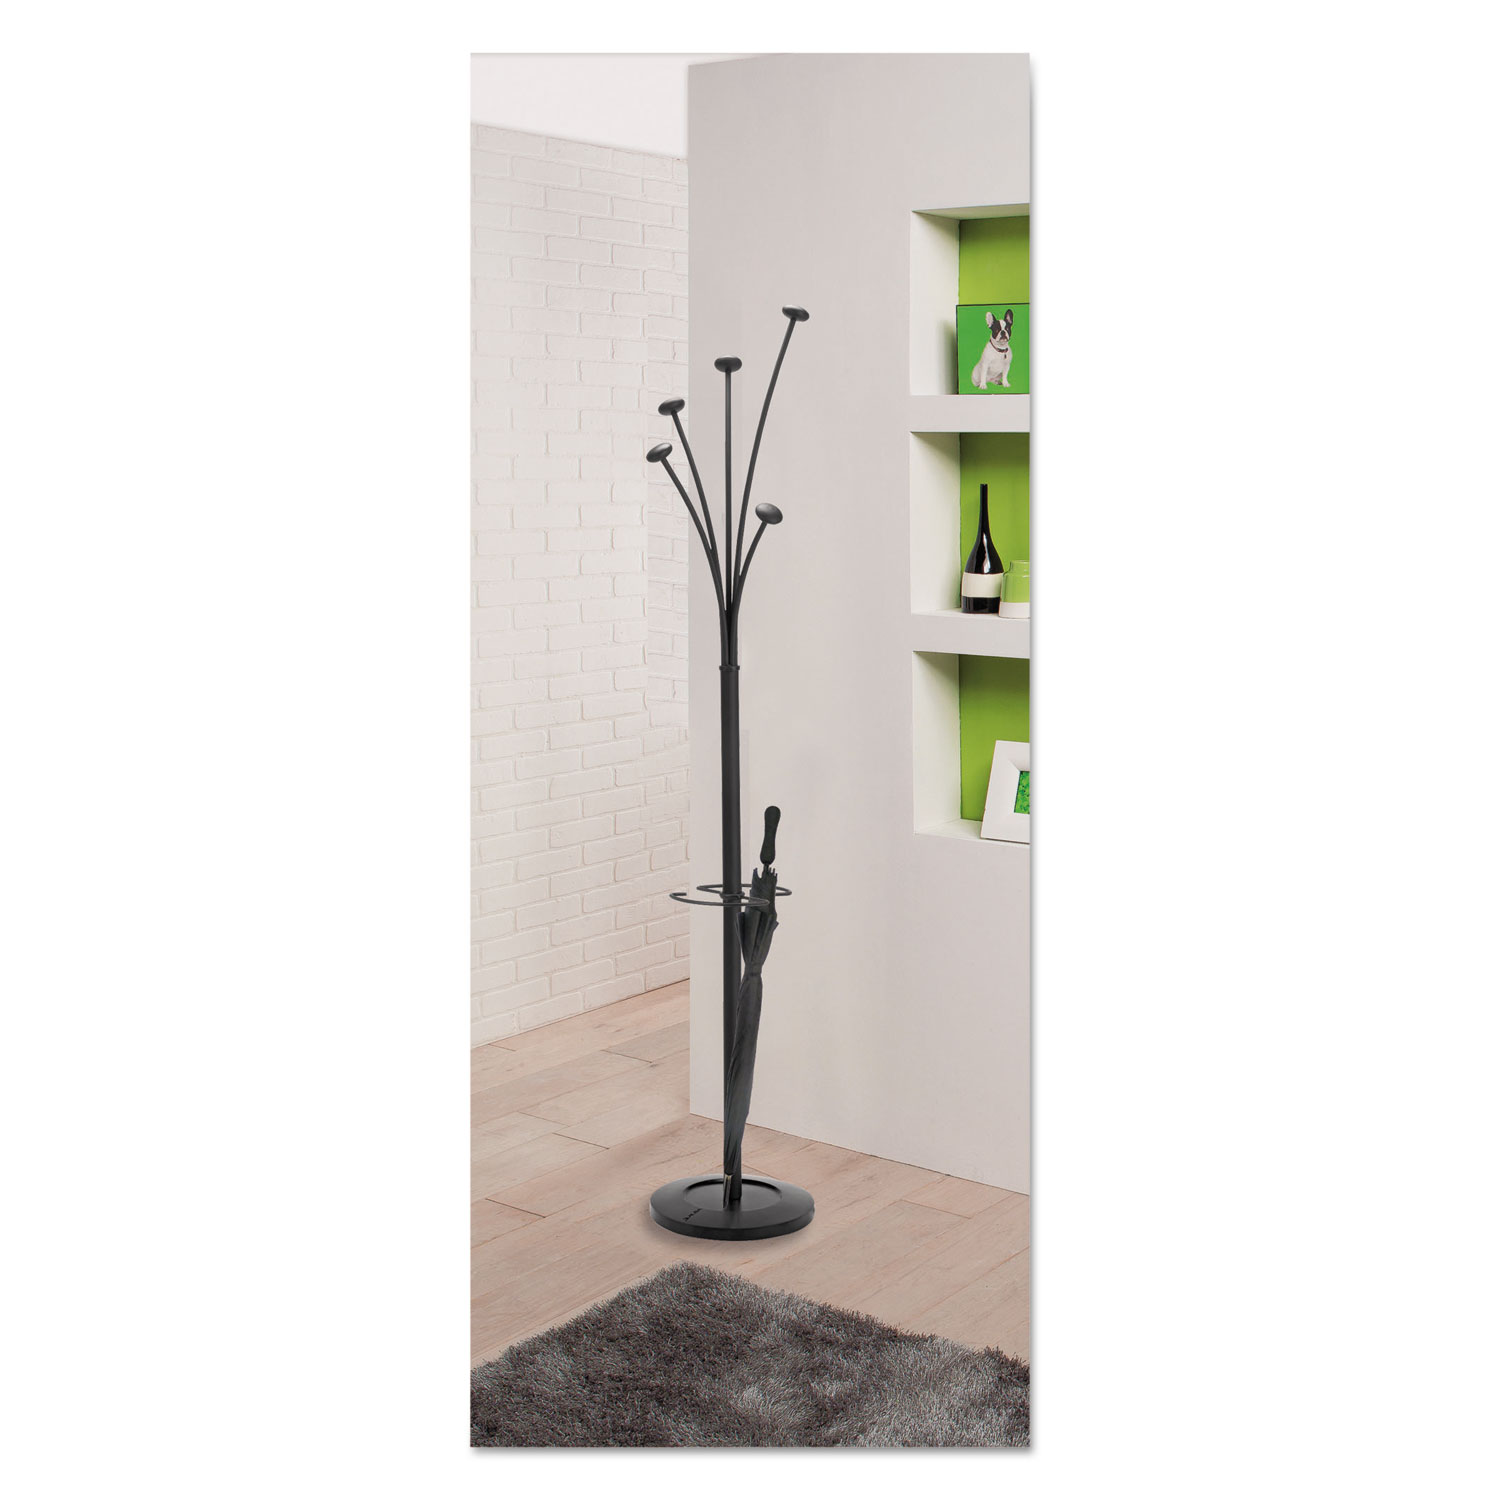 Festival Coat Stand with Umbrella Holder, 5 Knobs, 14w x 14d x 73-2/3h, Black